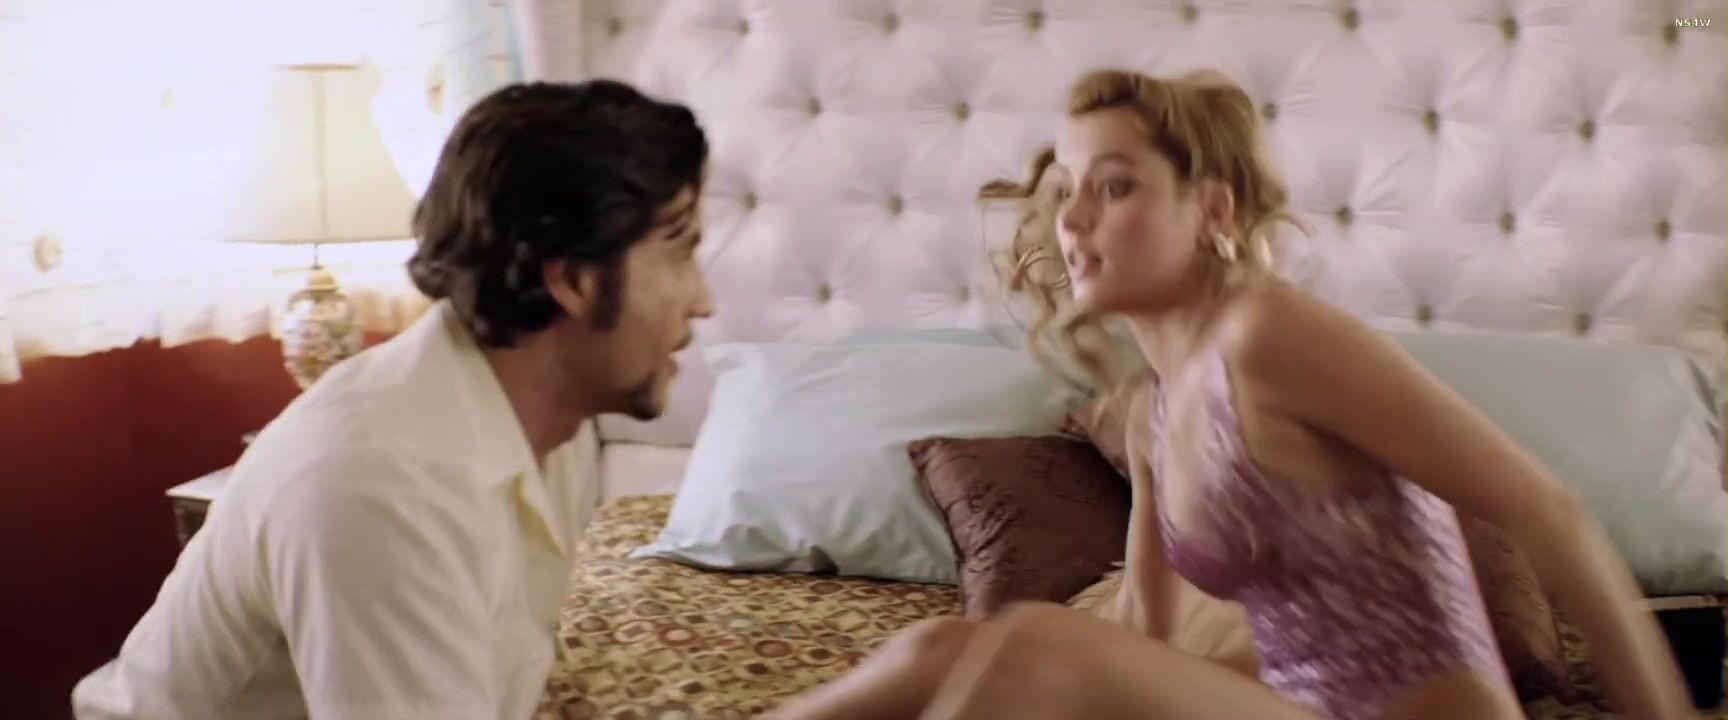 iYotTube Hands of Stone is story about boxer Roberto Duran who drills Ana De Armas (2016) Rough Porn - 1